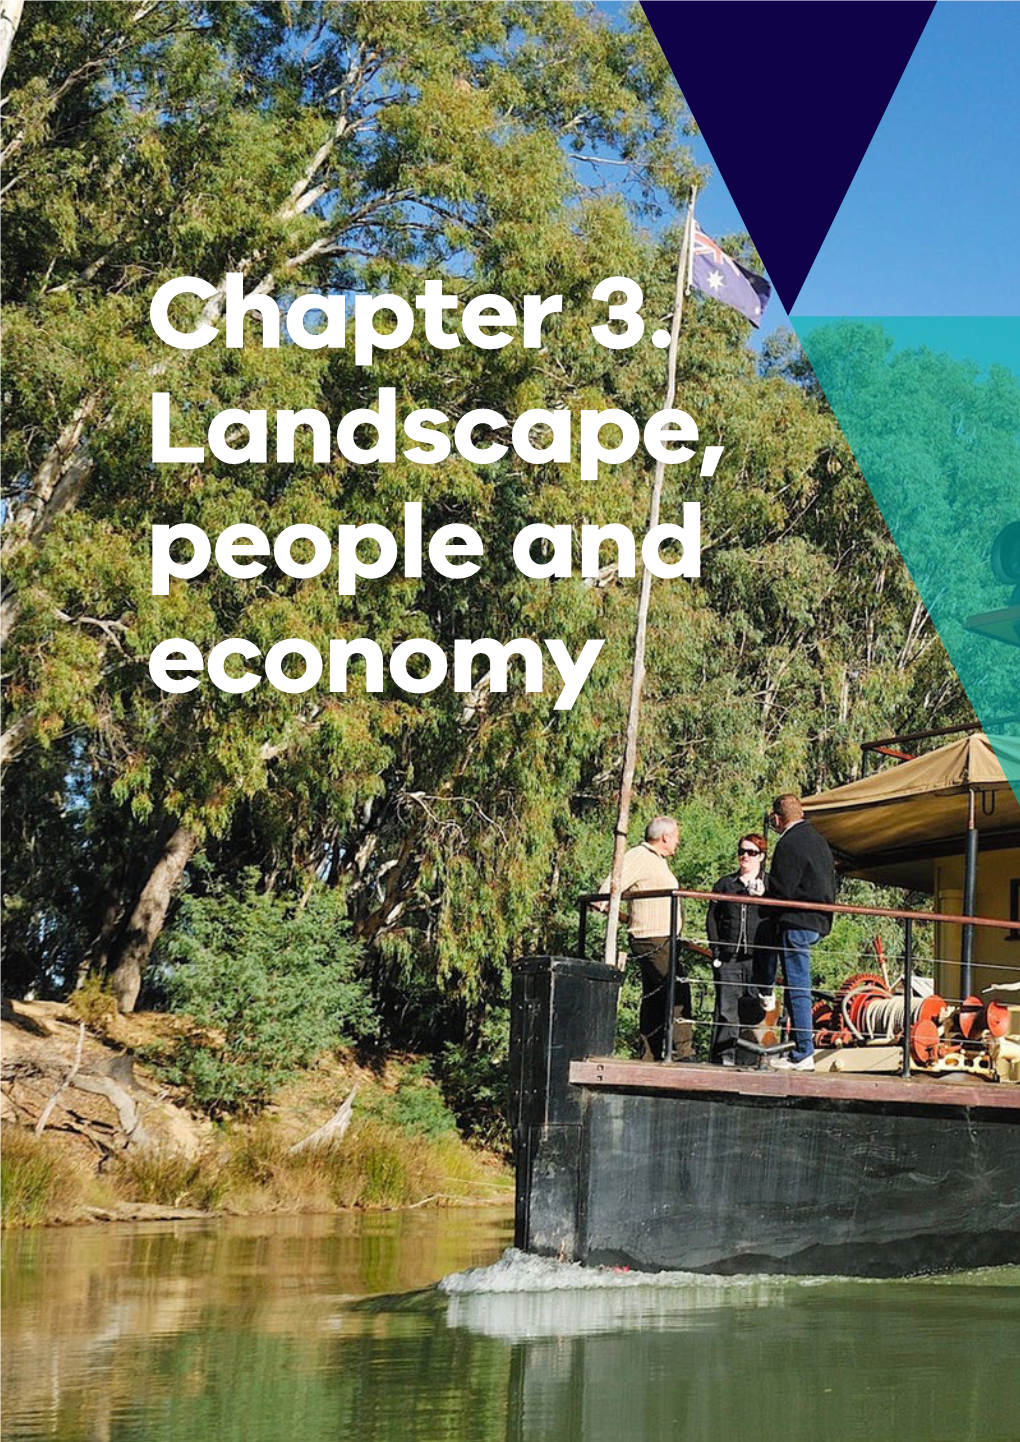 Chapter 3. Landscape, People and Economy